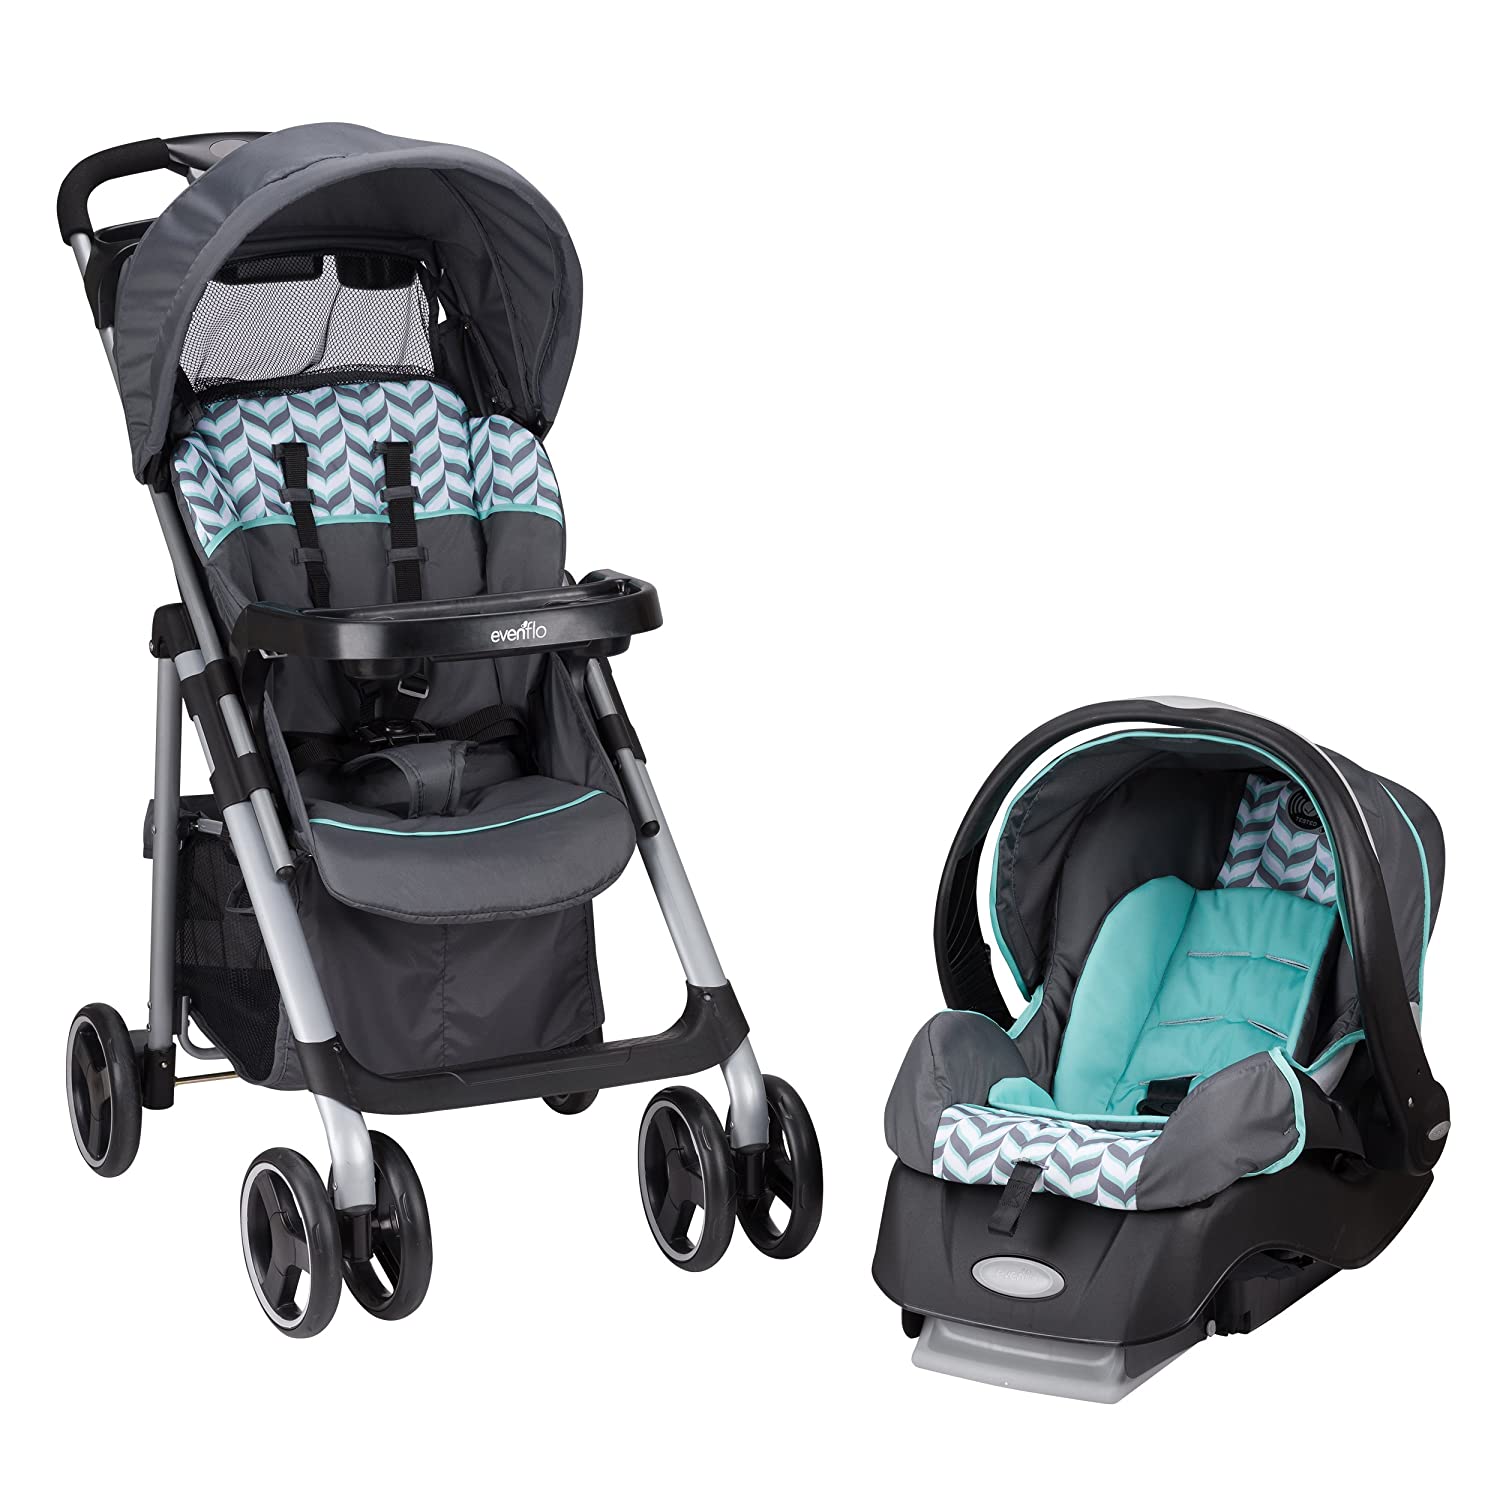 Top 5 Best Infant Travel Systems Reviews in 2022 2